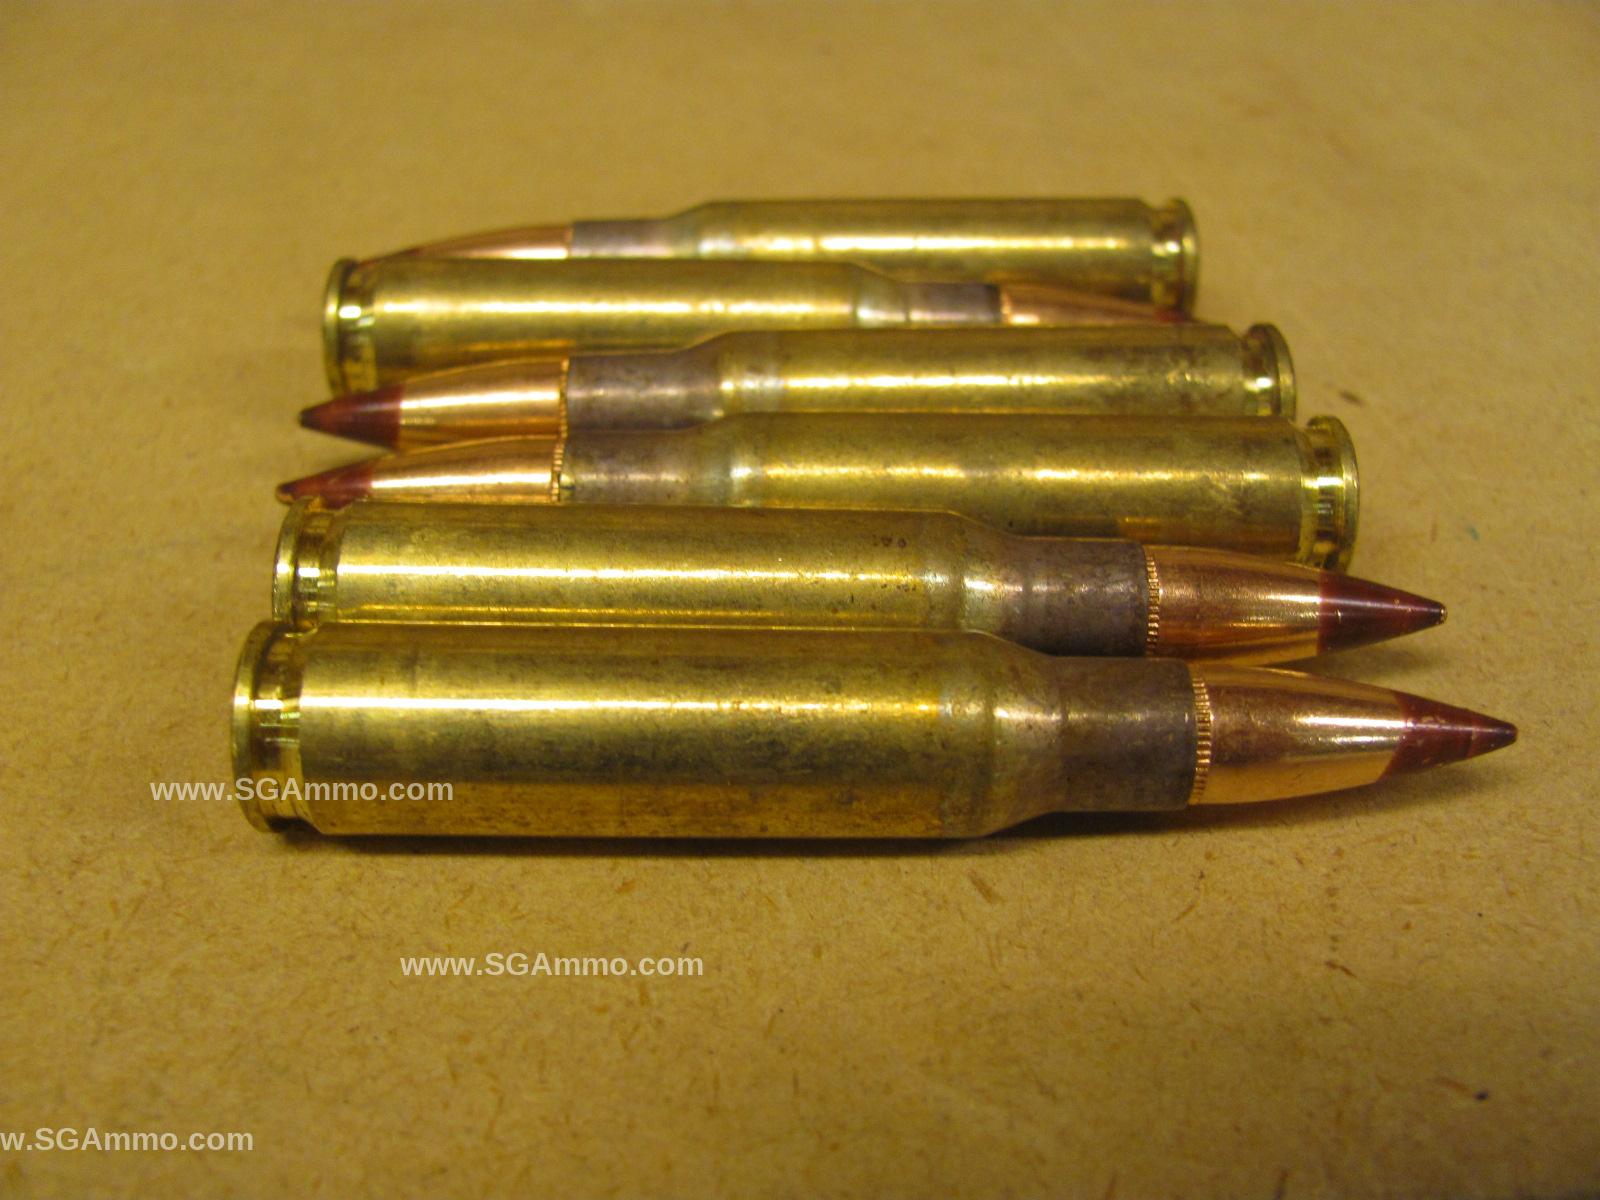 500 Round Can - 7.62 Nato Lake City M62A1 Tracer Ammo - Loose Pack in M2A1 Canister